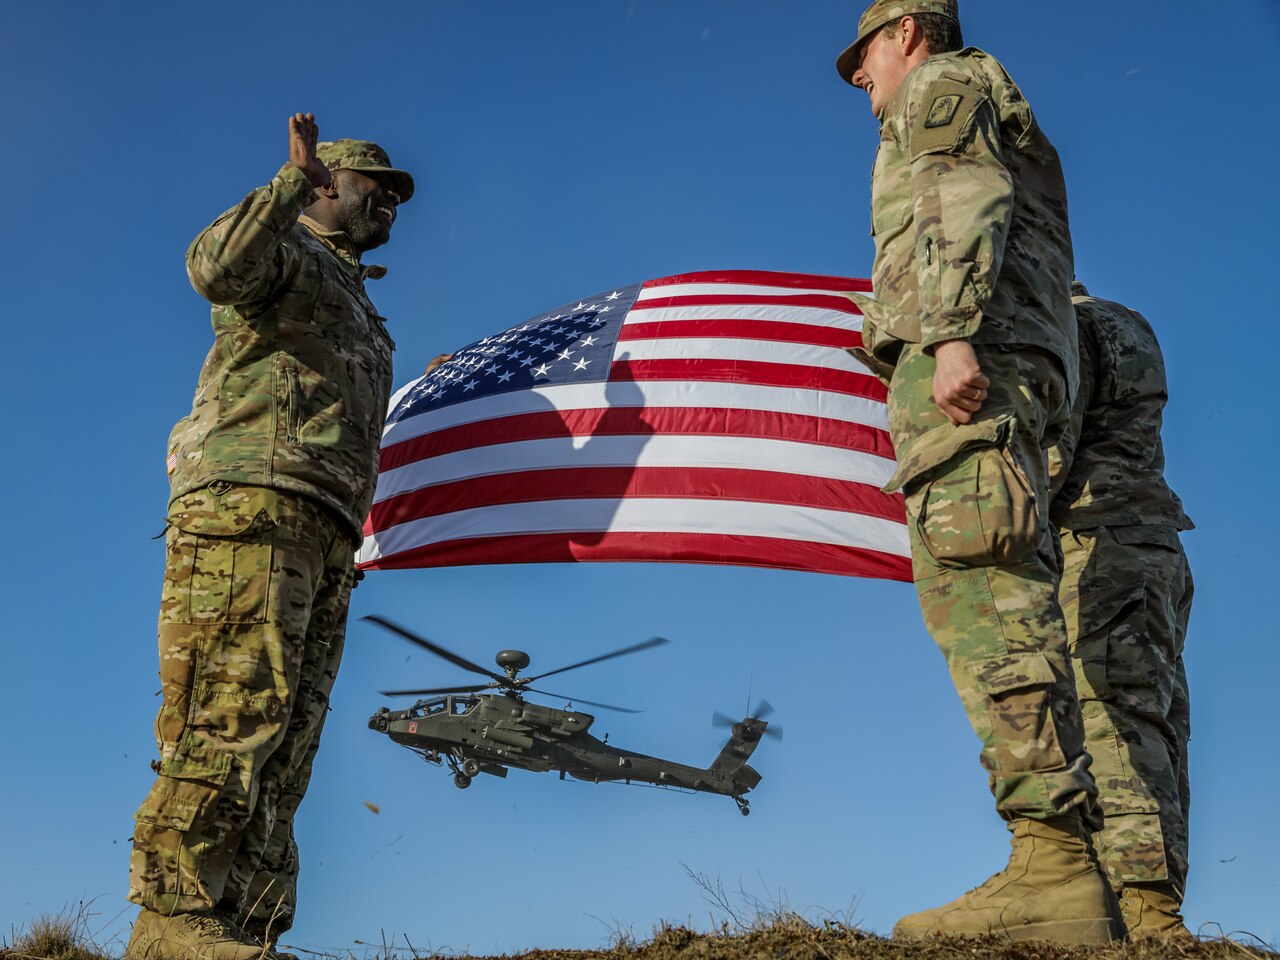 Soldiers with a flag United State of America and Helicopter.